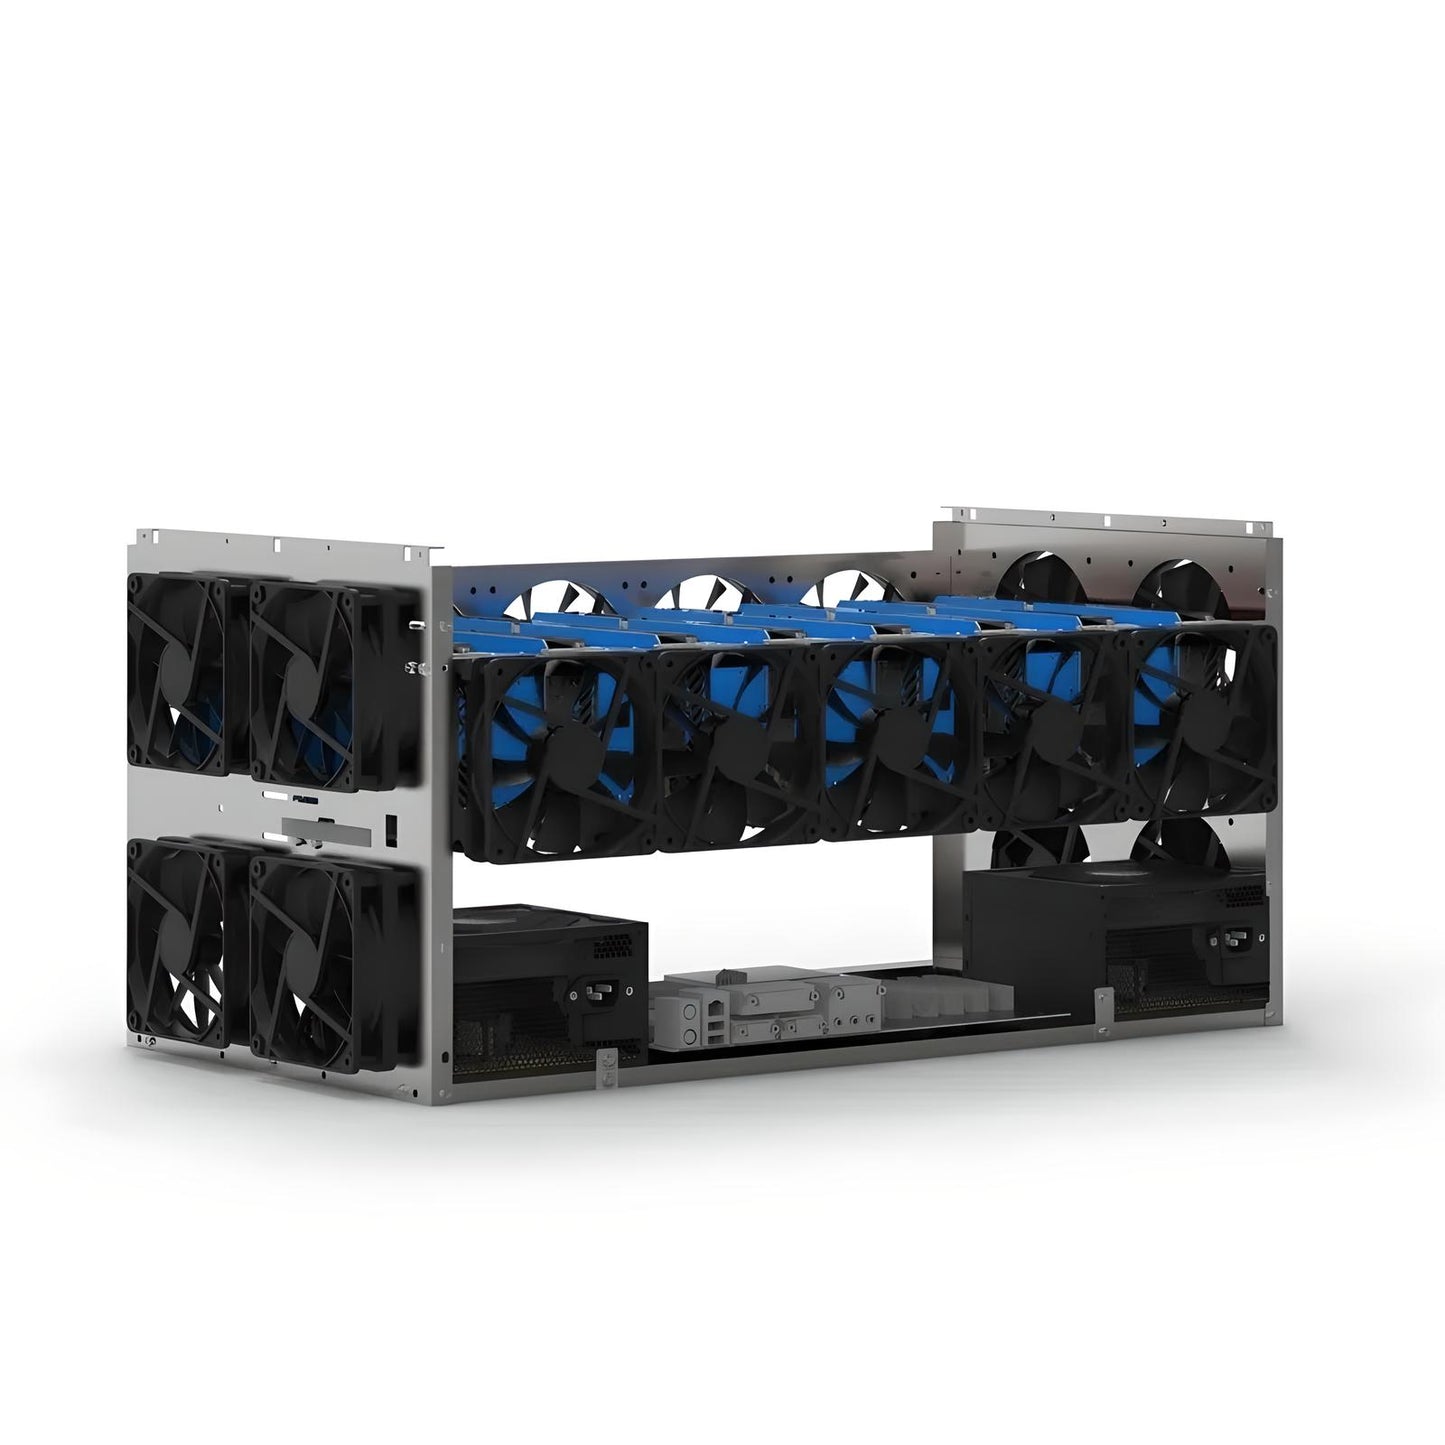 6-10 GPU Stackable Open Air Mining Frame